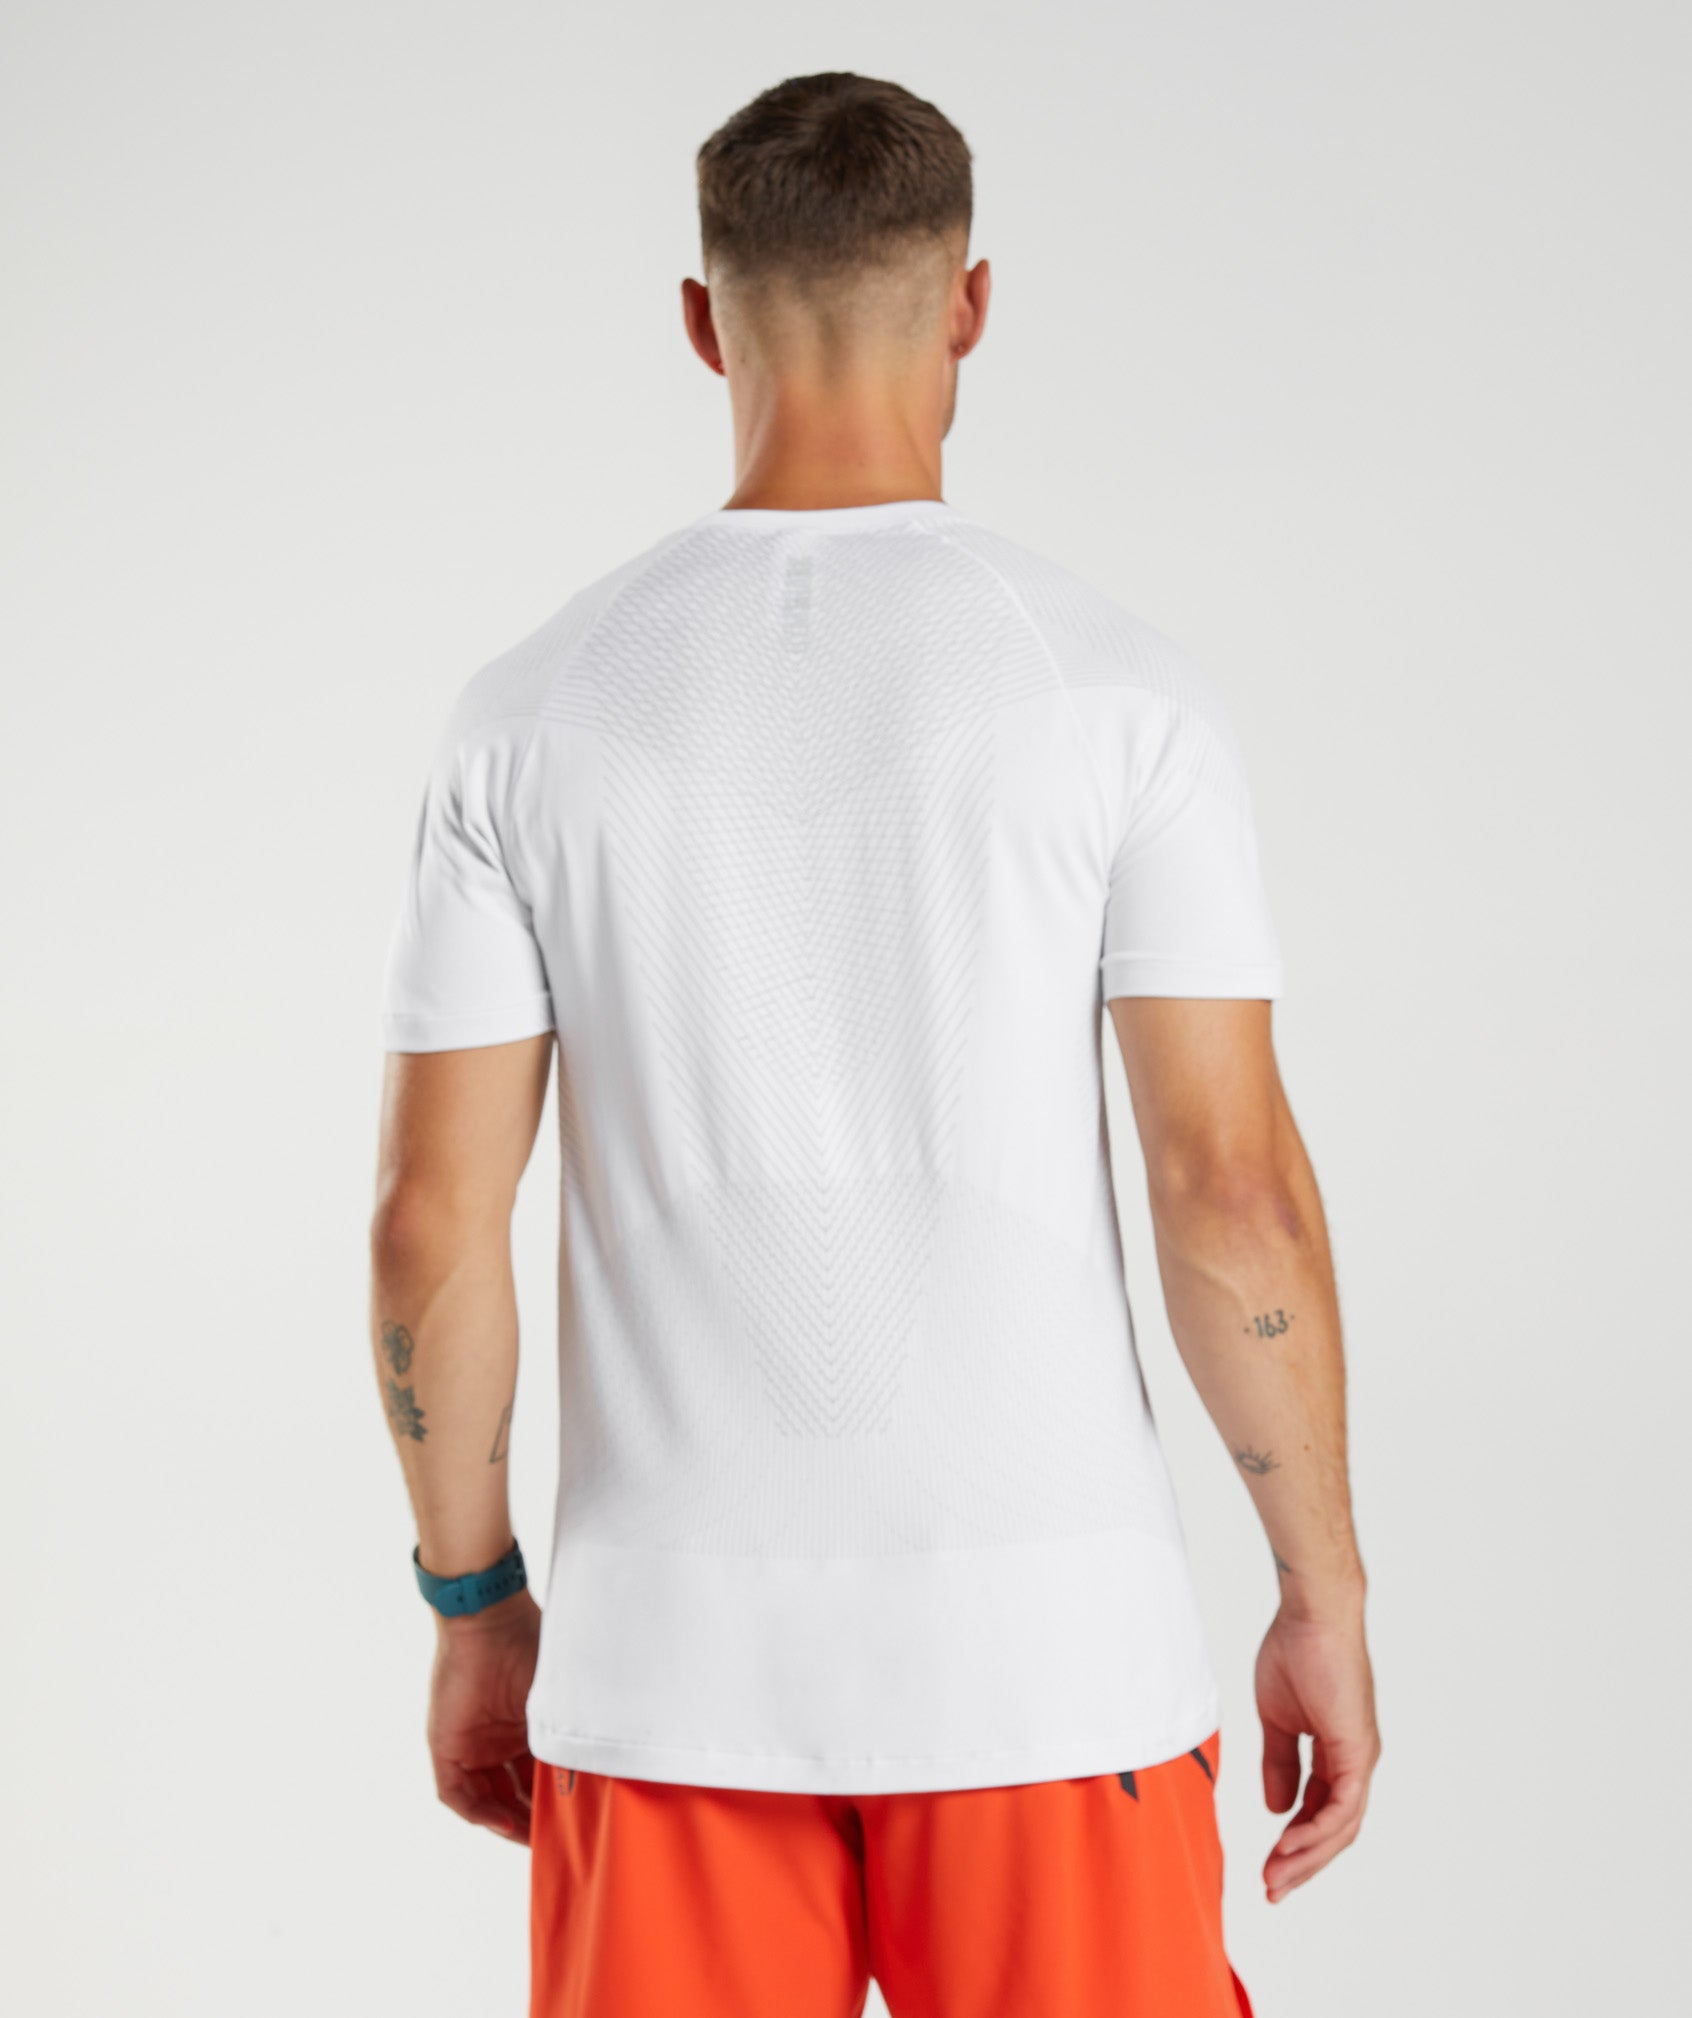 Apex Seamless T-Shirt in White/Light Grey - view 2